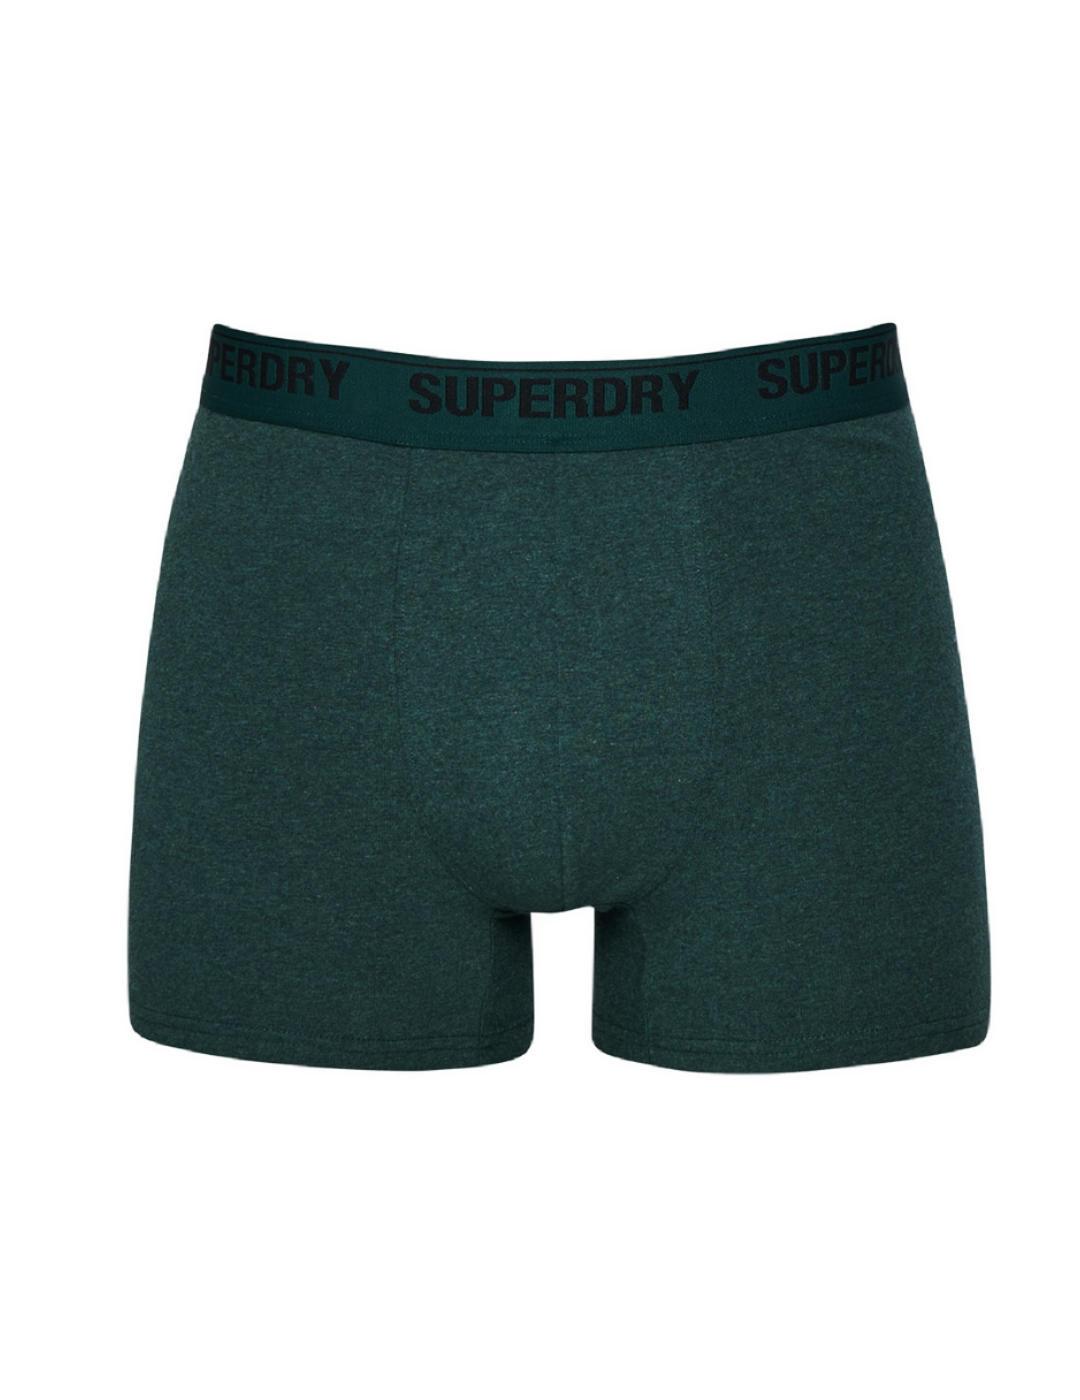 Intimo Superdry boxer pack2 verde para hombre-b